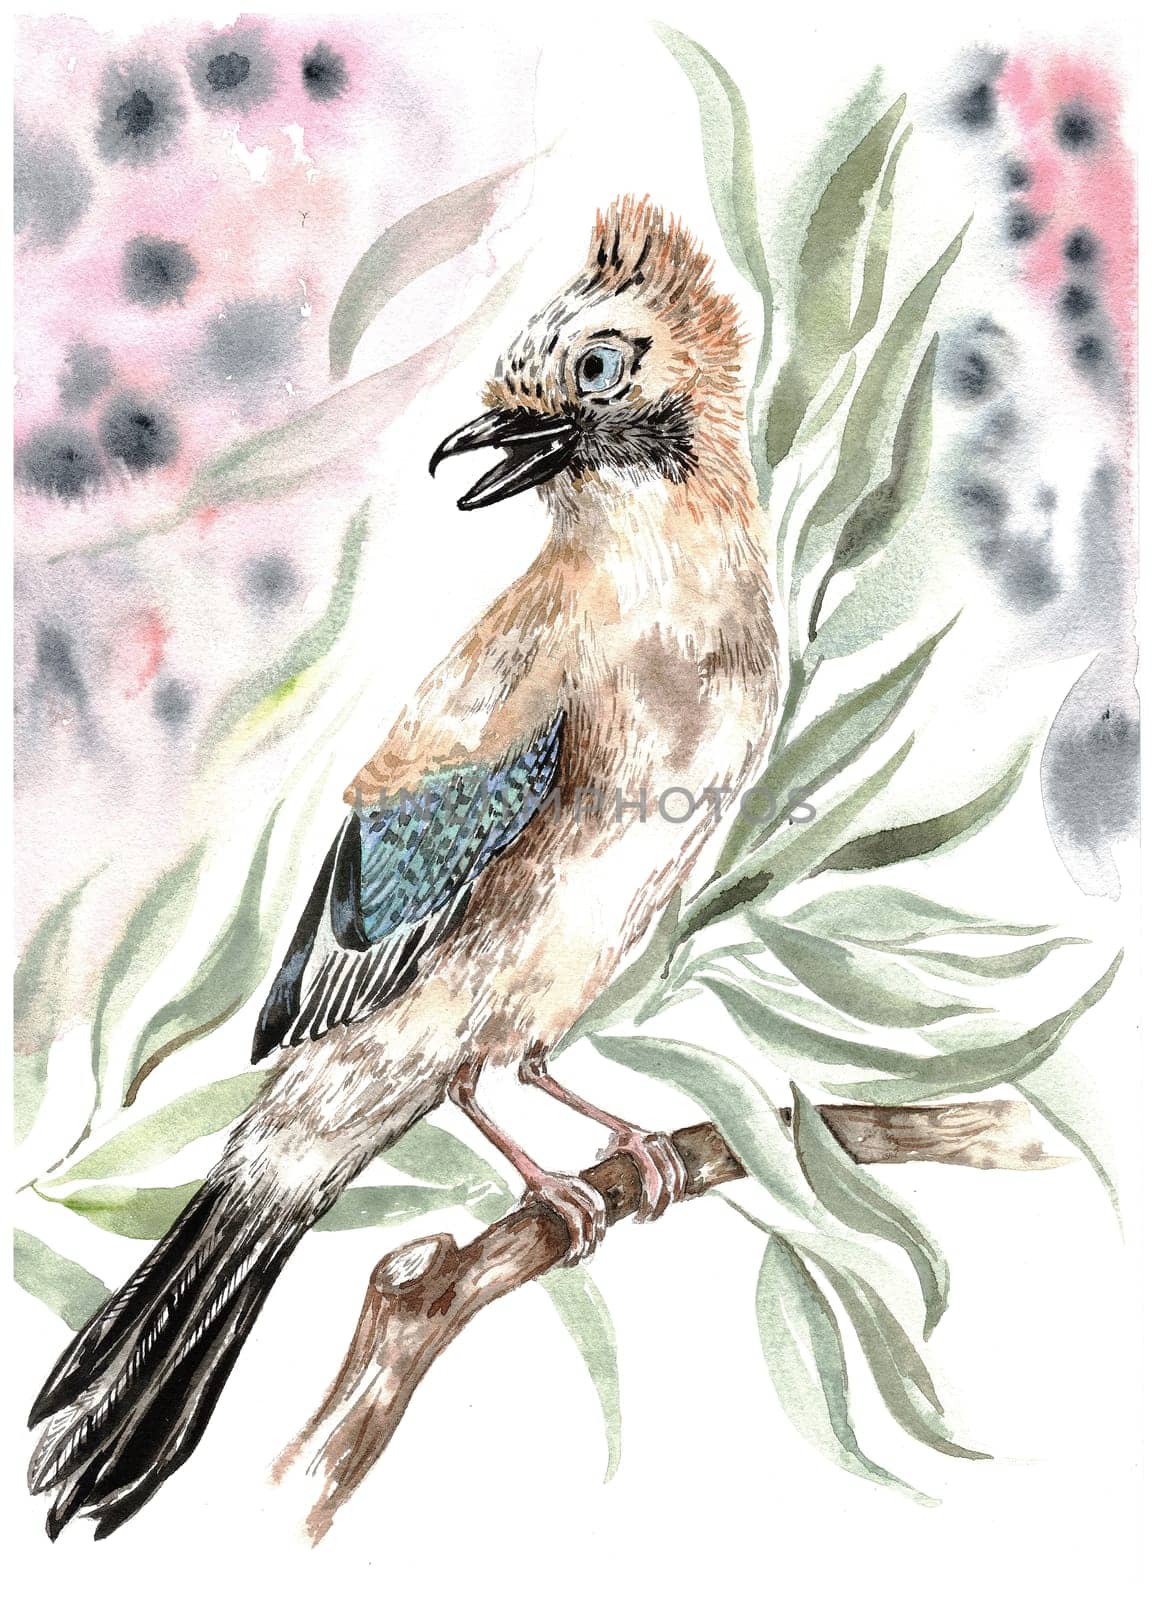 Eurasian jay, Garrulus glandarius, sitting on decorative tree branch with flowers and leaves of oak. Realistic detailed illustration for design.